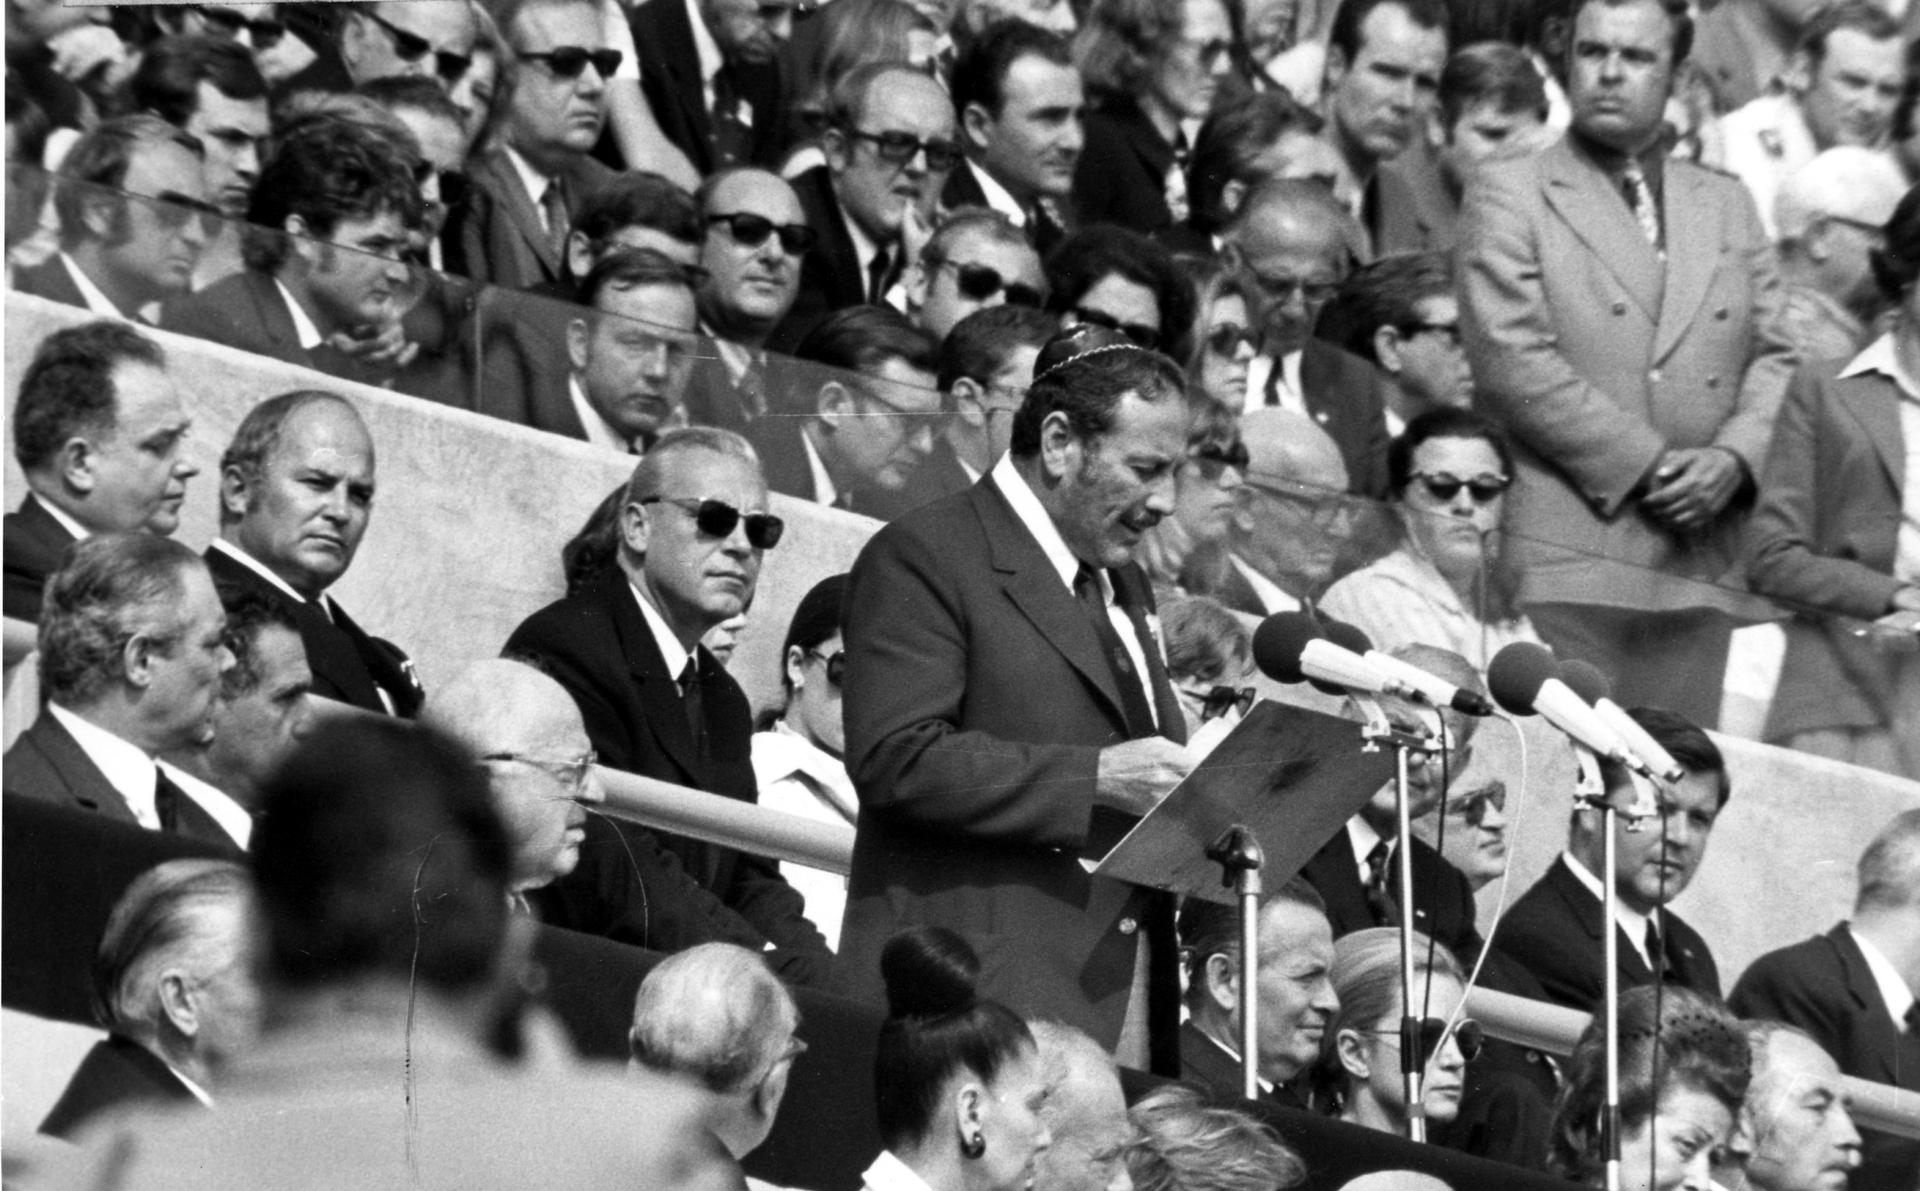 Israel's Olympic team chief Shmuel Lalkin delivers his speech during a memorial service in the Olympic stadium in Munich, West Germany, Sept. 6, 1972.